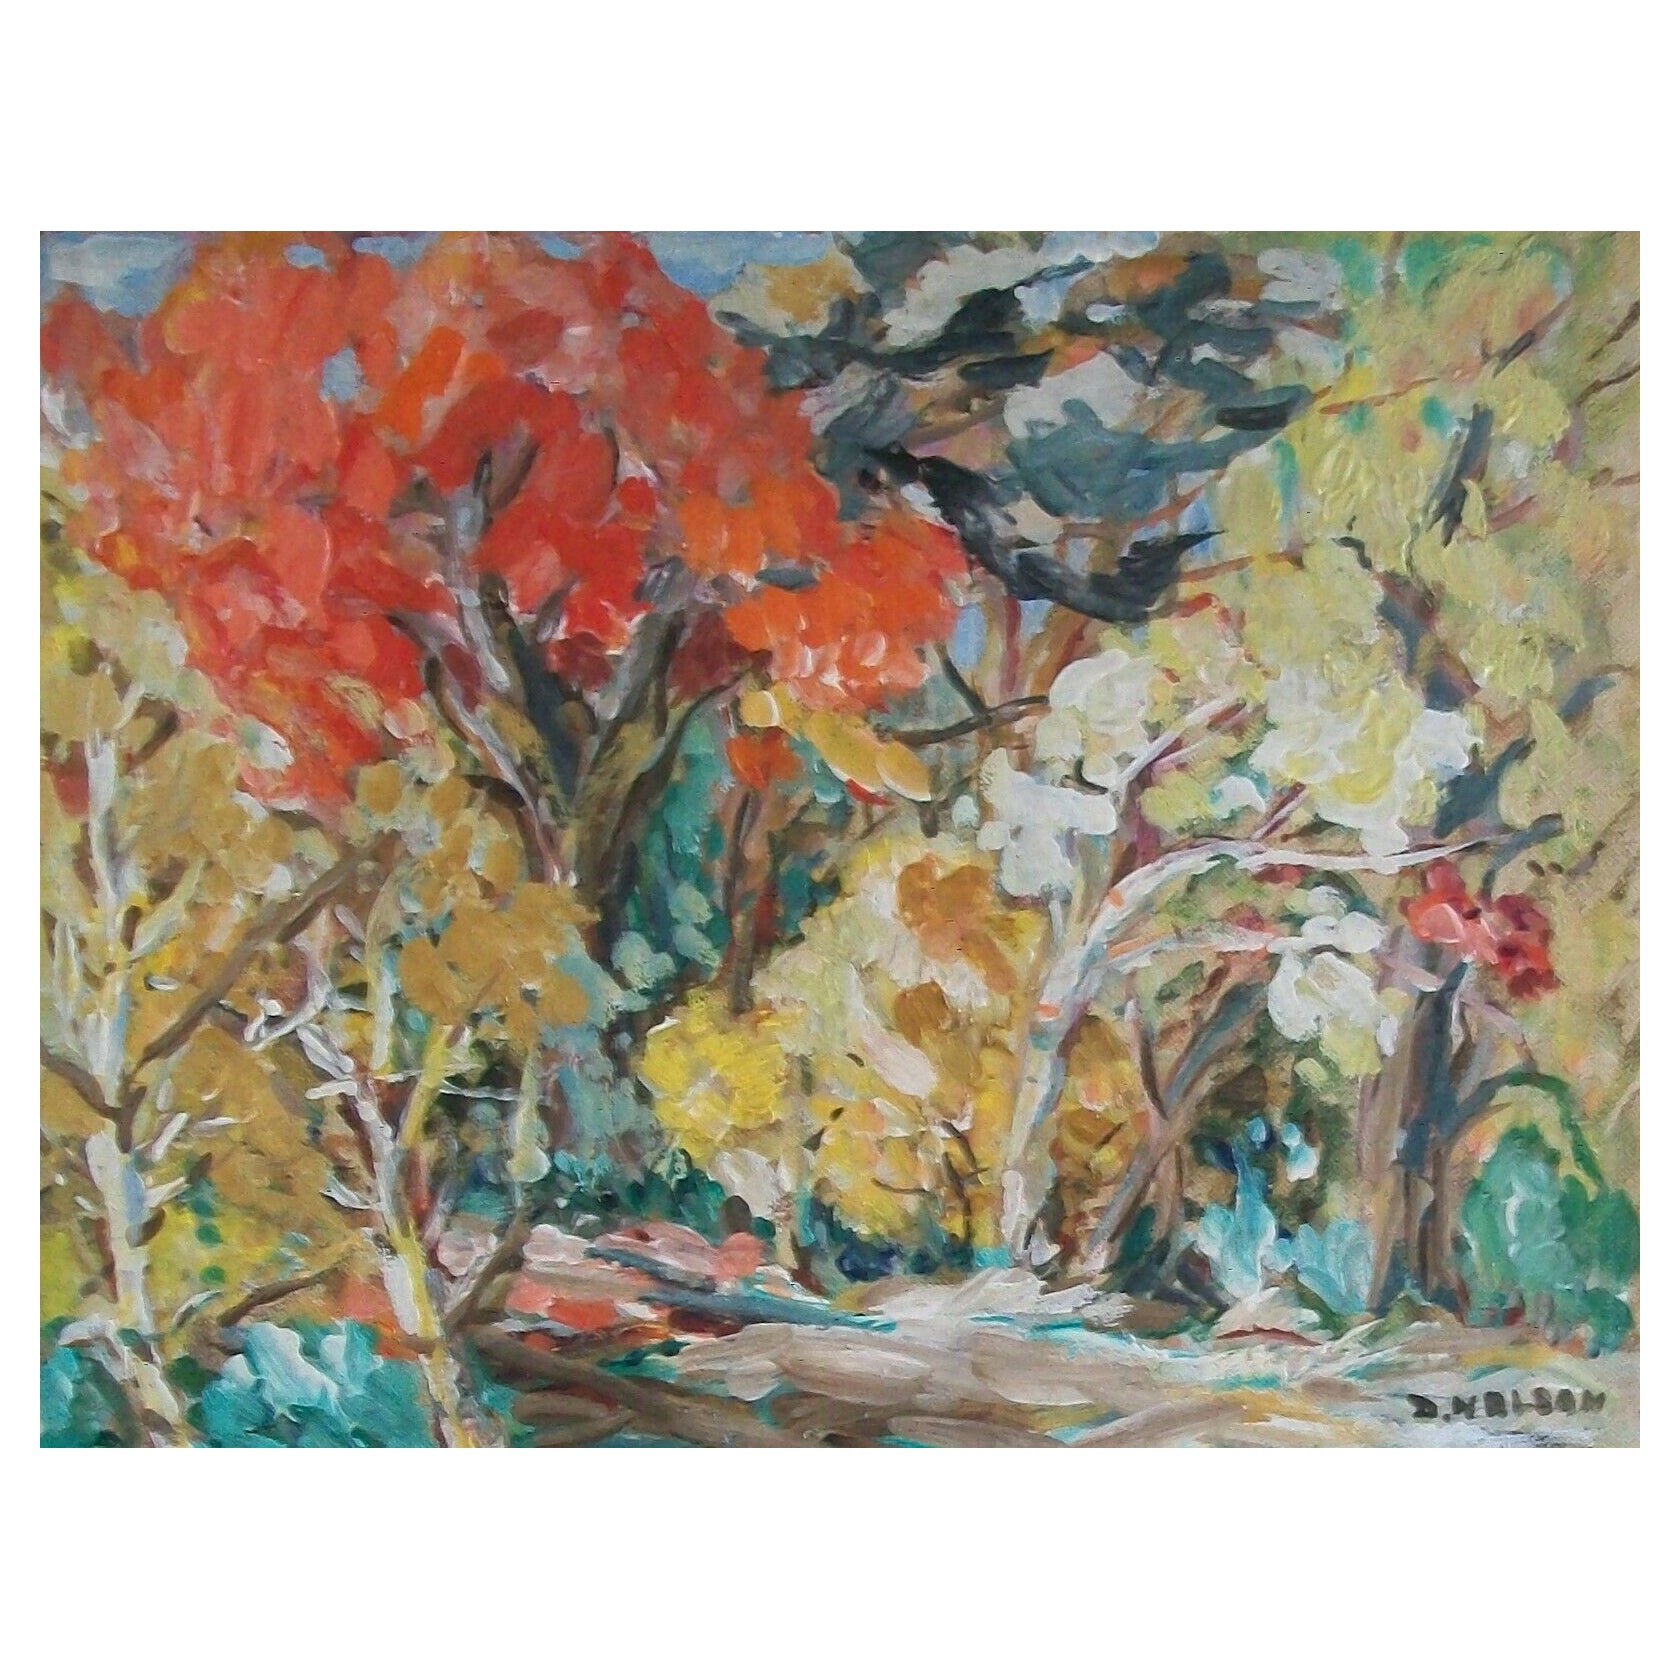 D. Nelson, Expressionist Oil Painting on Panel, Signed, Canada, circa 1950's